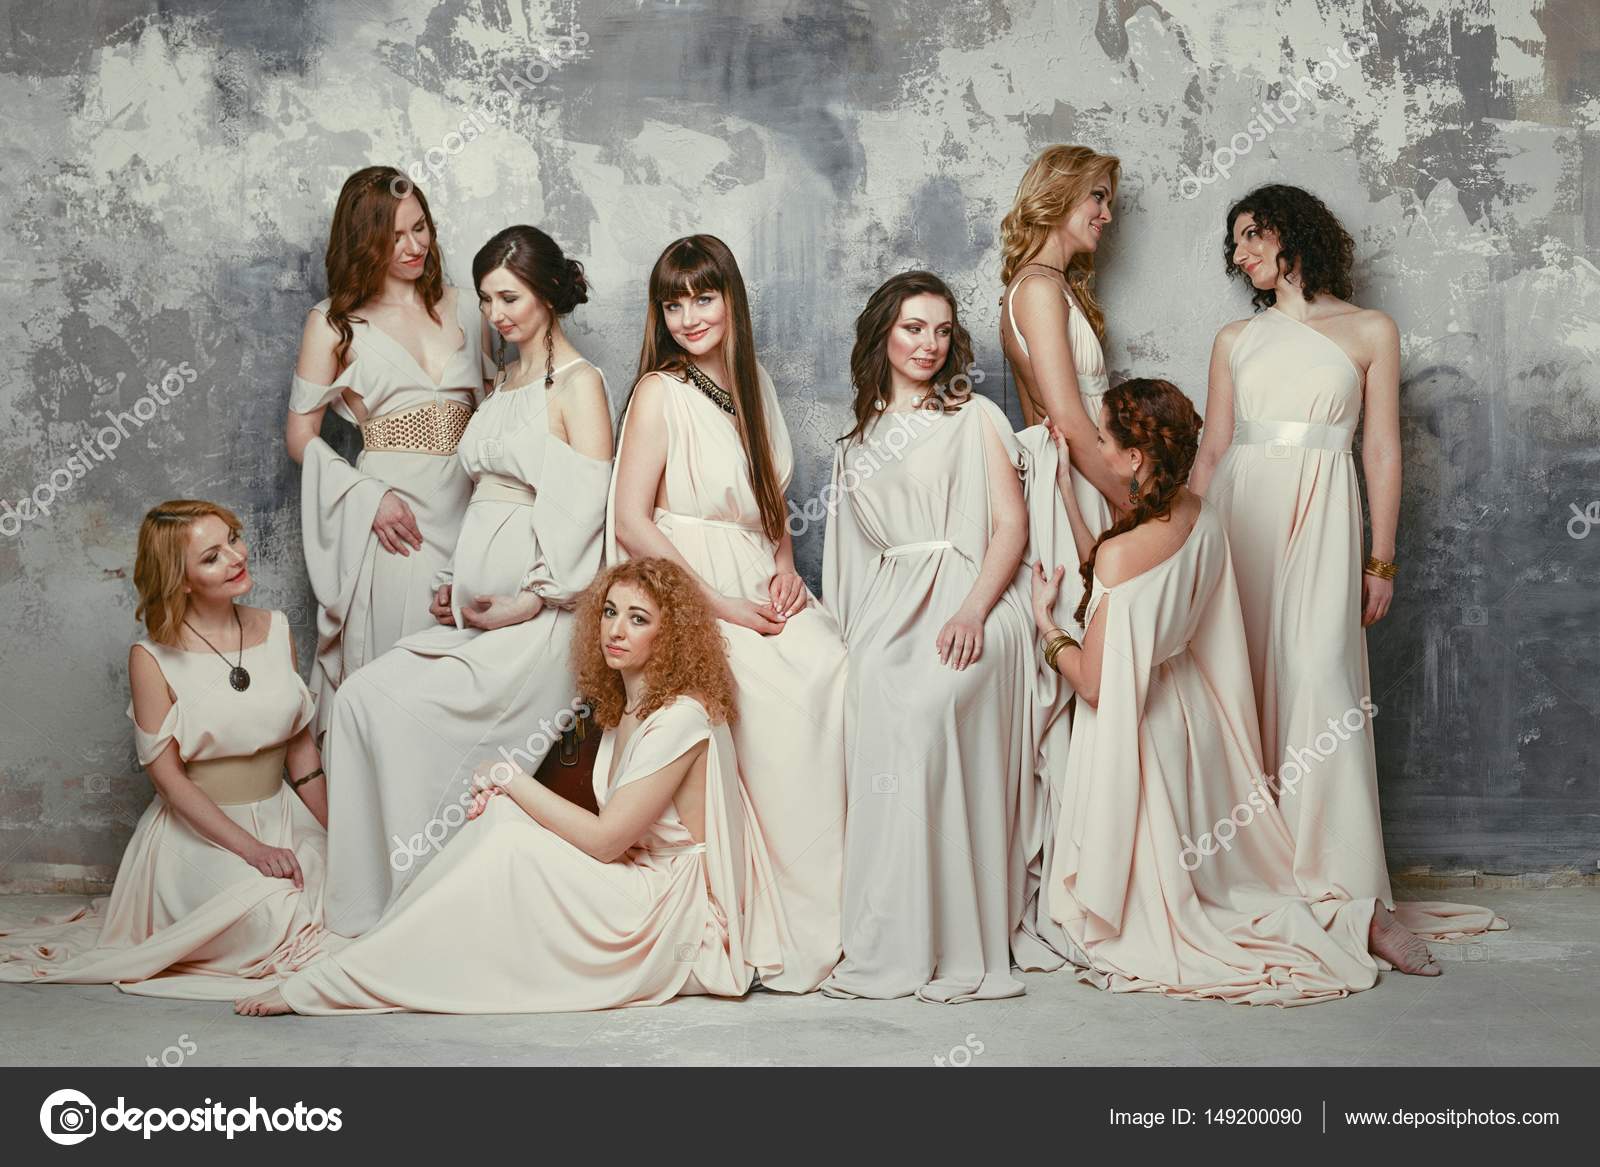 Pics: ancient greek clothing | Women in ancient greek style dresses ...